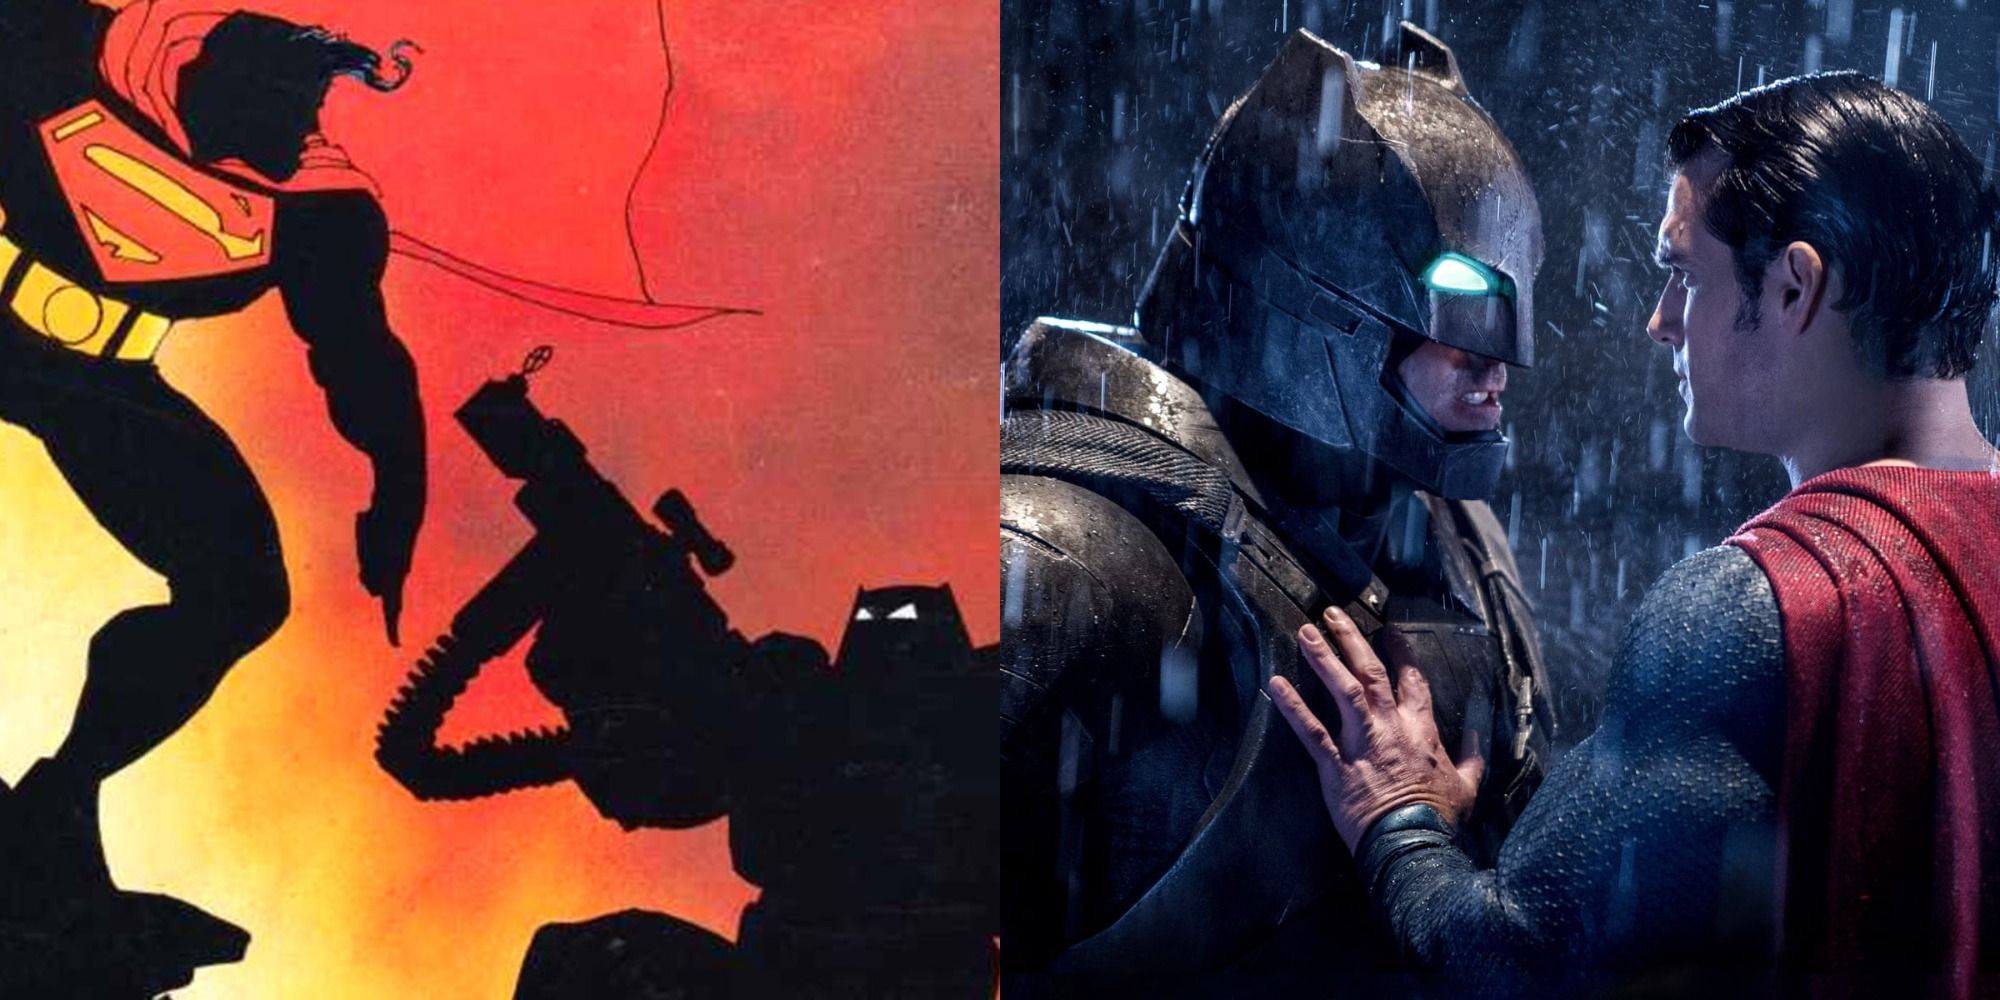 A split image of Batman fighting in the comics and Batman and Superman confronting each other in Batman v Superman